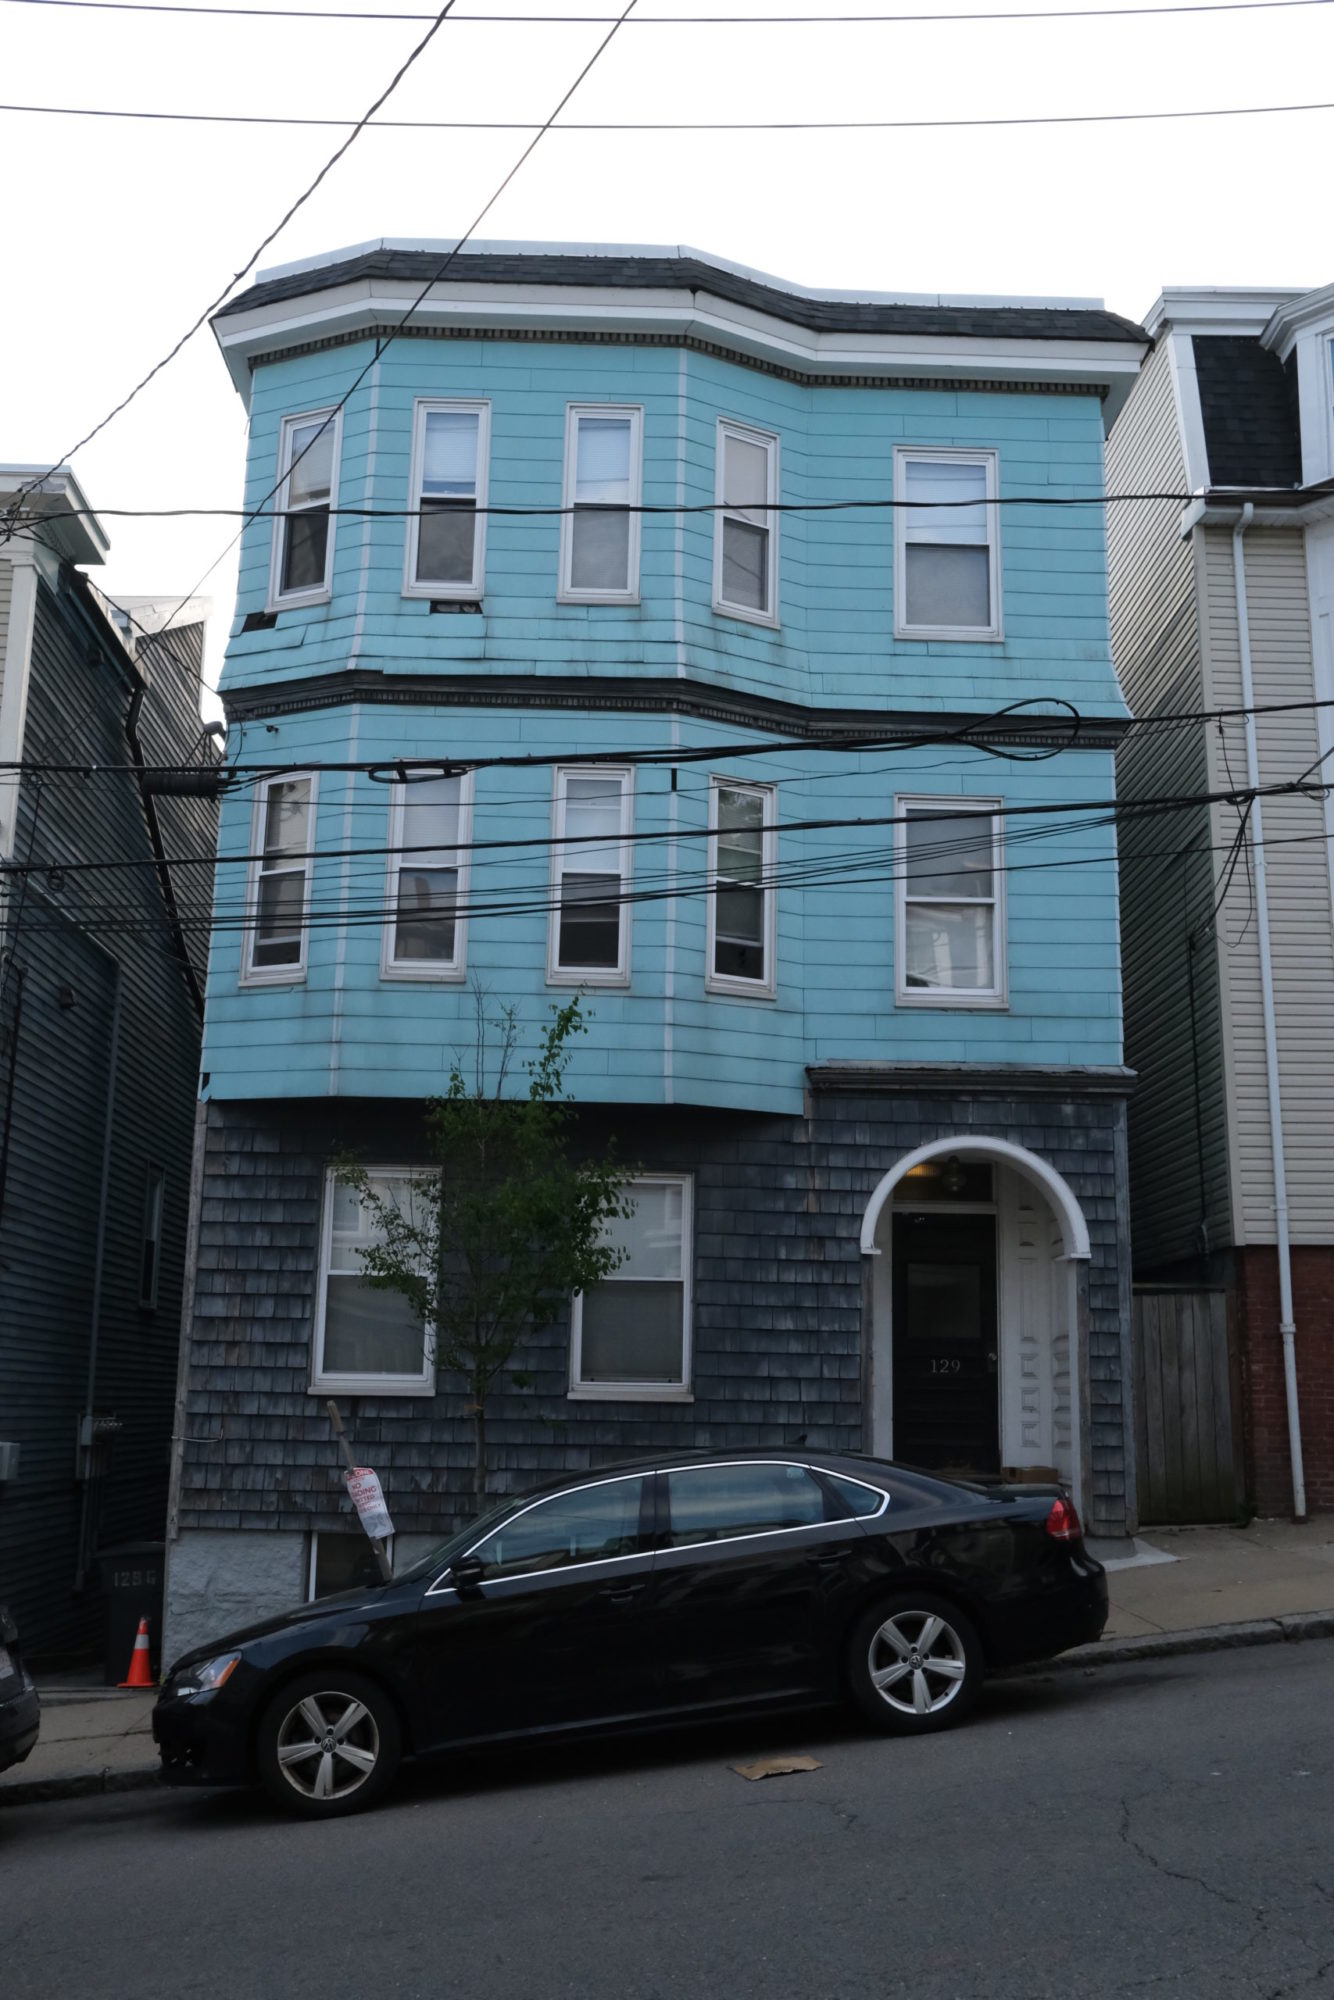 A straight on street view shot of a three story home. The bottom floor is dark grey. The top two floors are light blue. The front door is under an arched awning on the front right of the building. There are bay windows on the front left of the second and third stories. A car is parked directly out front. A street sign is bent. Telephone wires cross in view.